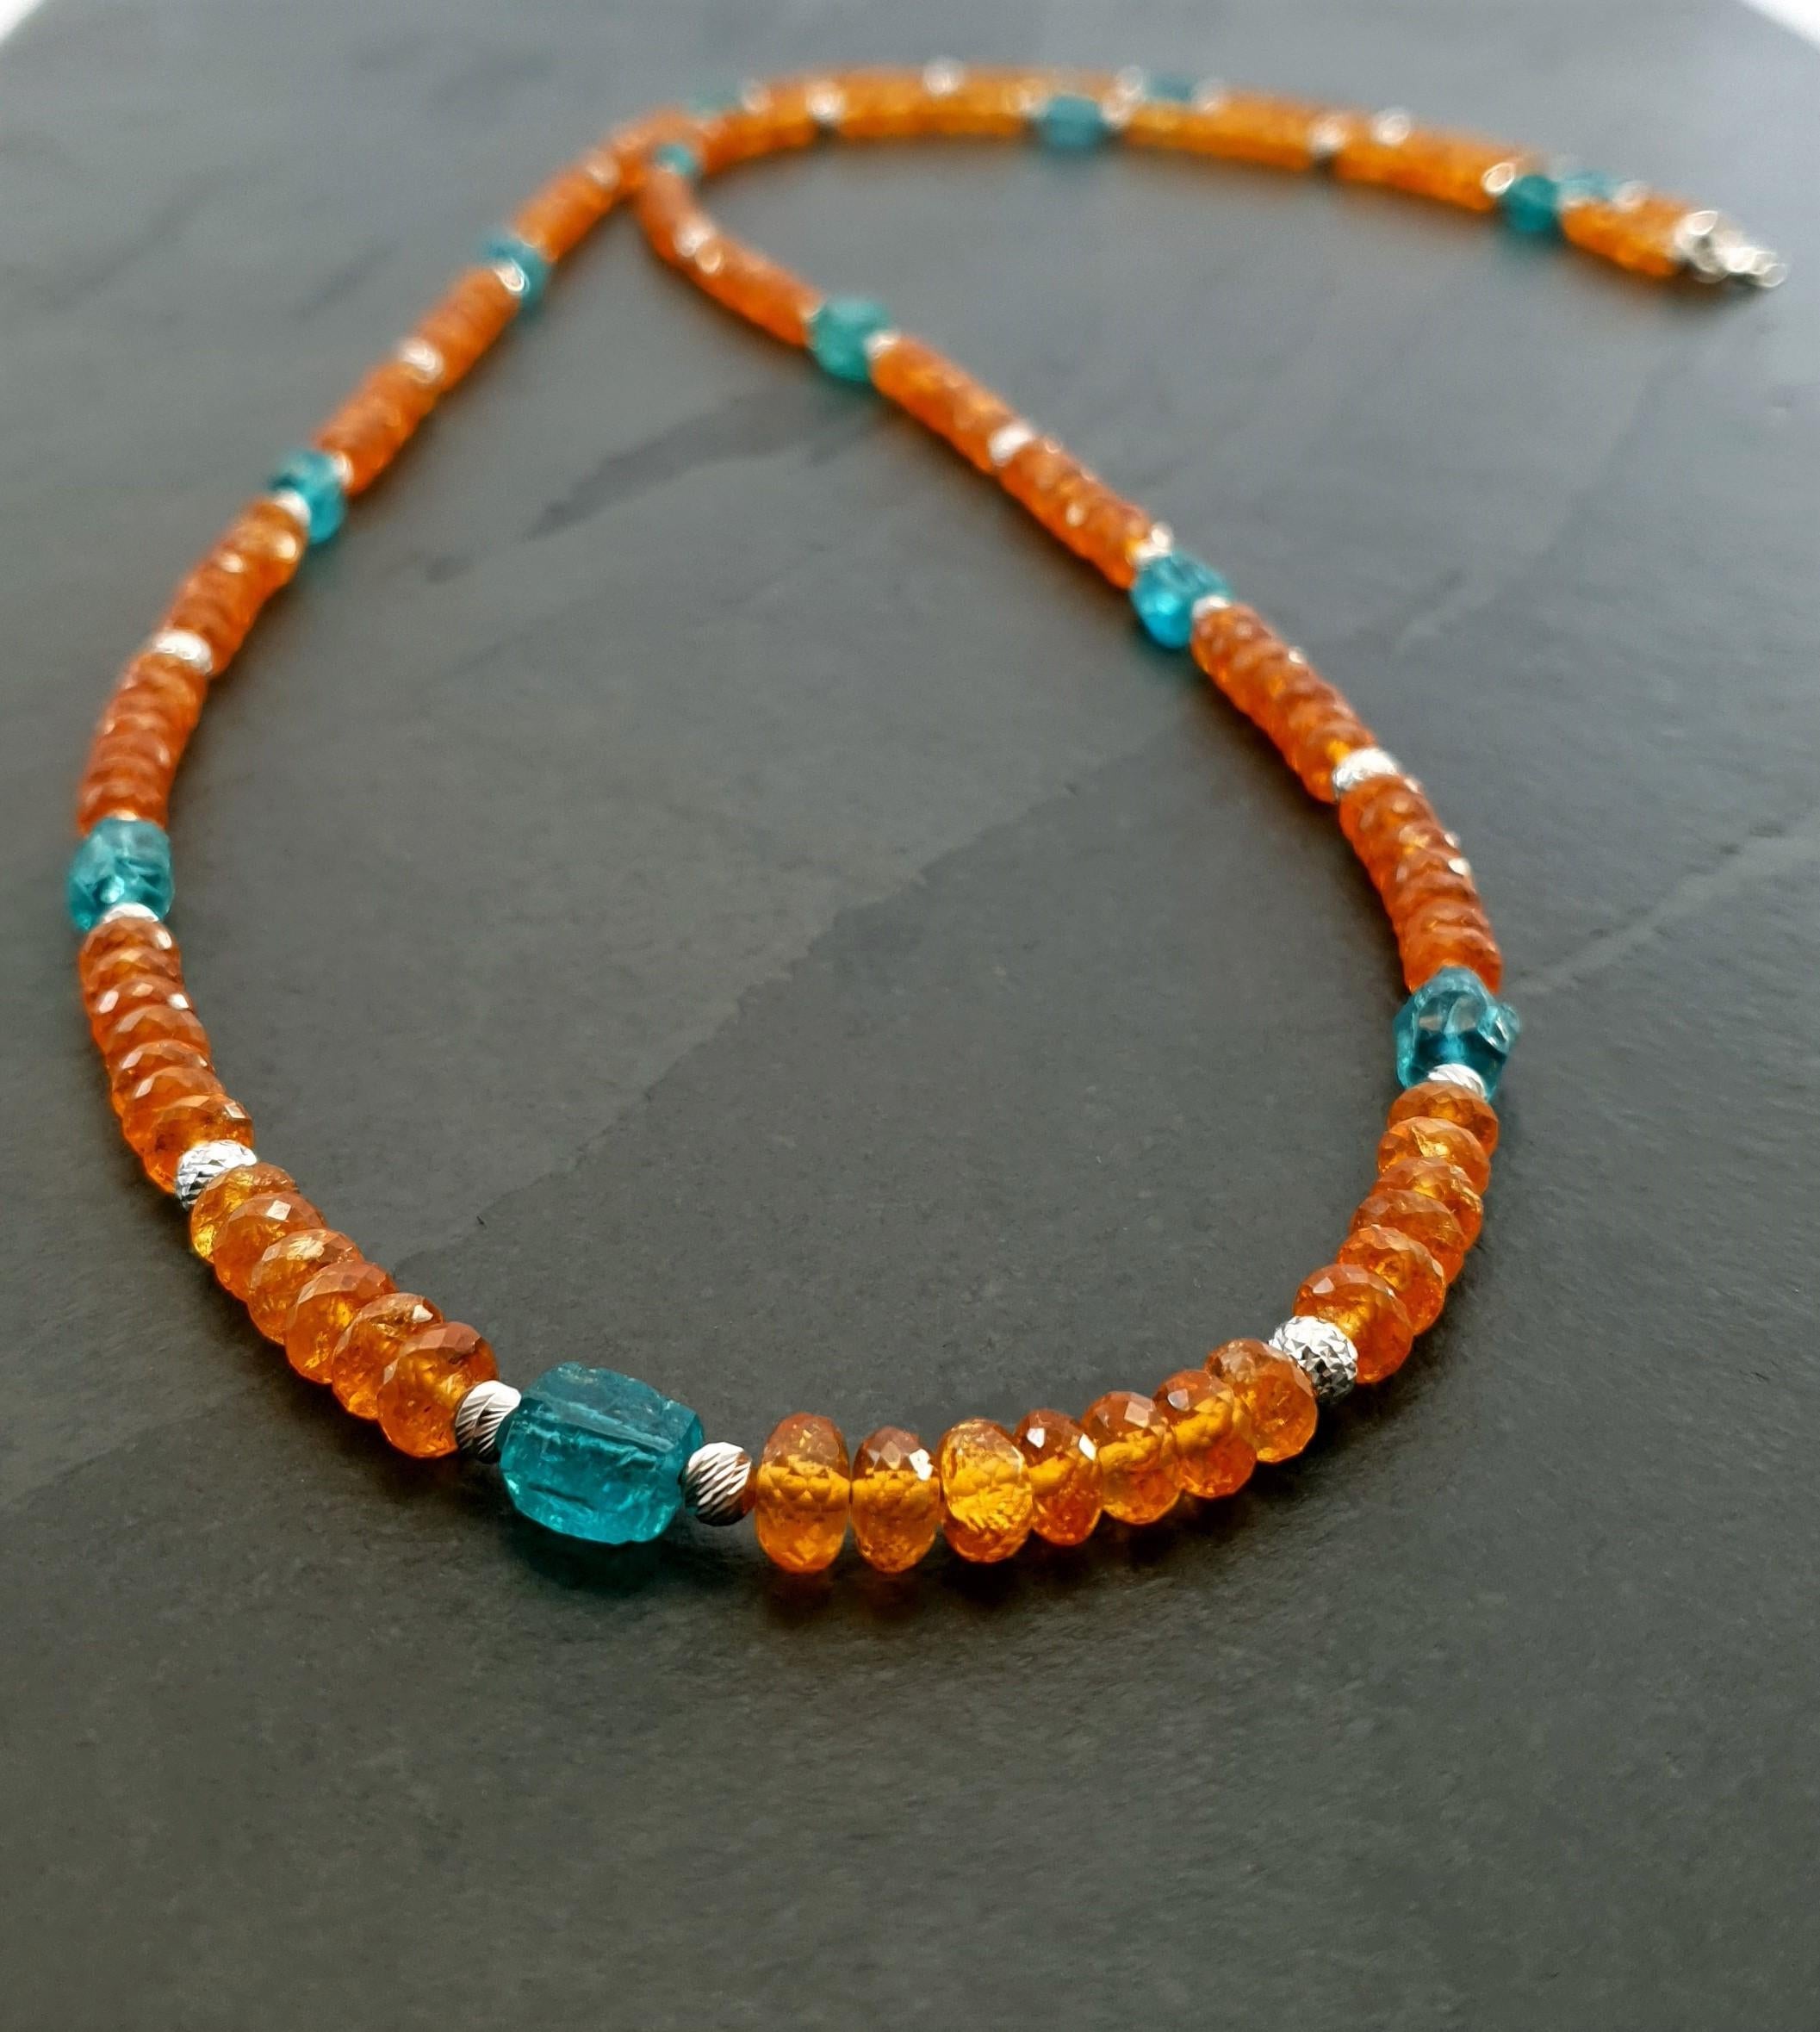 Orange Garnets and Paraiba Color Apatite Beads Necklace with 18 Carat White Gold 1